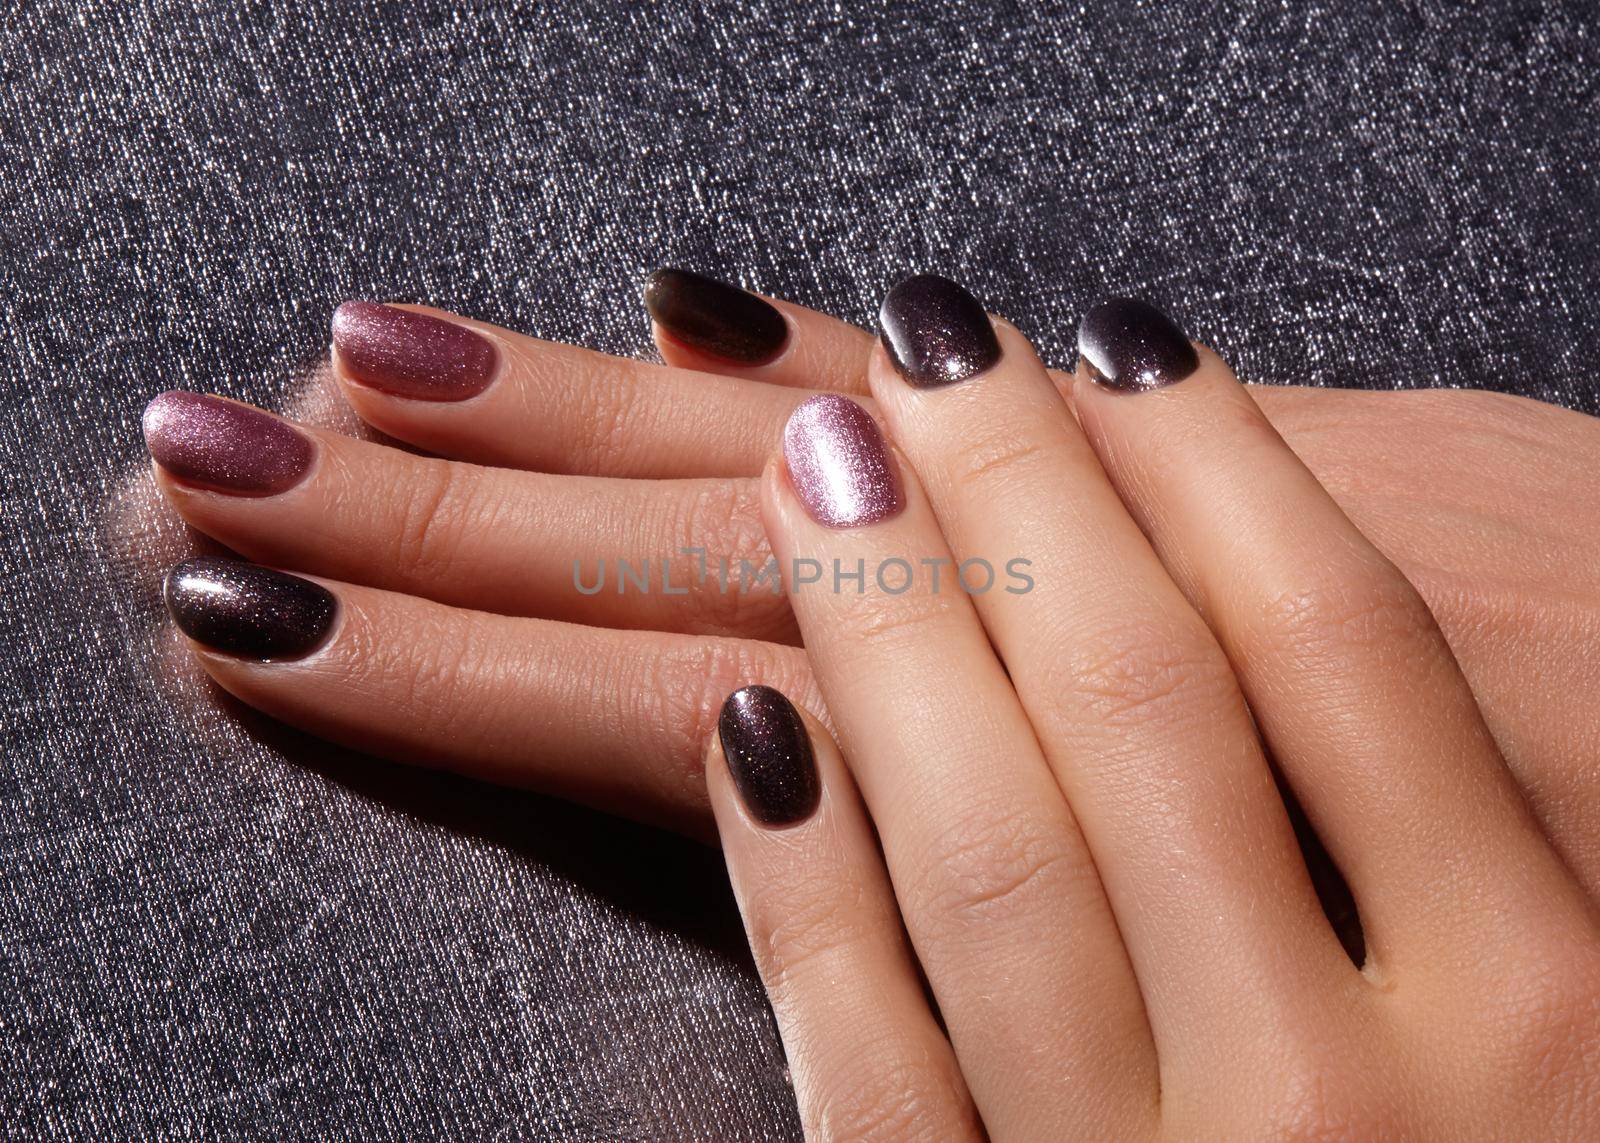 Bright pink and black nail polish wit sparkles. Manicured nails with shiny nail polish. Manicure with gel nailpolish. Fashion art manicure with shiny acrylic lacquer